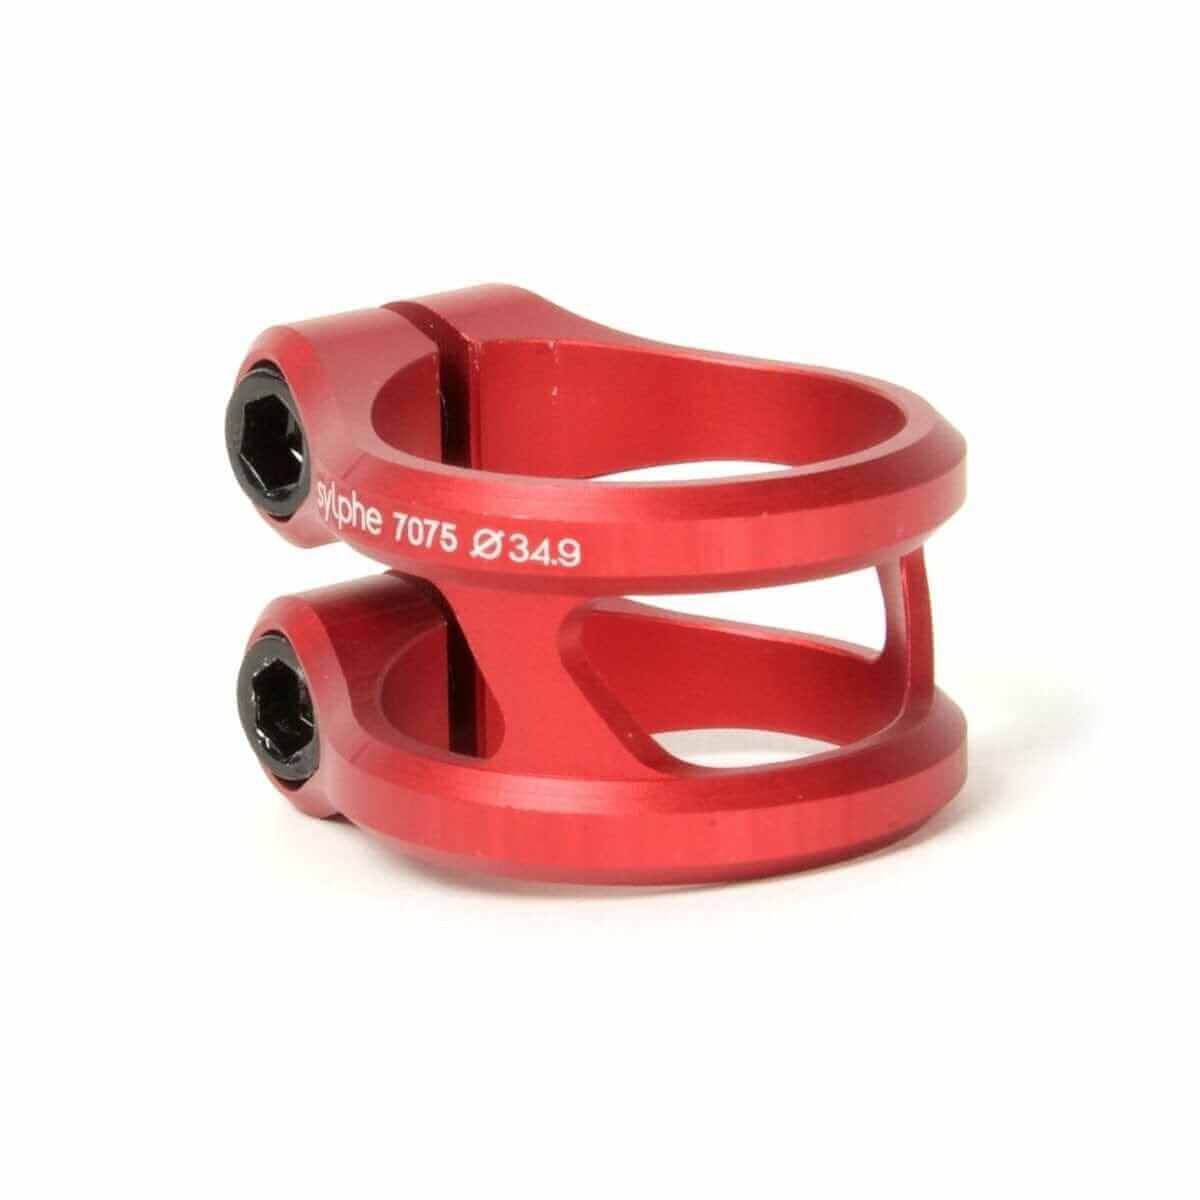 Ethic DTC Slyphe Clamp |CLAMPS |$29.90 |TSP The Shop | Ethic DTC Slyphe Clamp | ProScooterLab